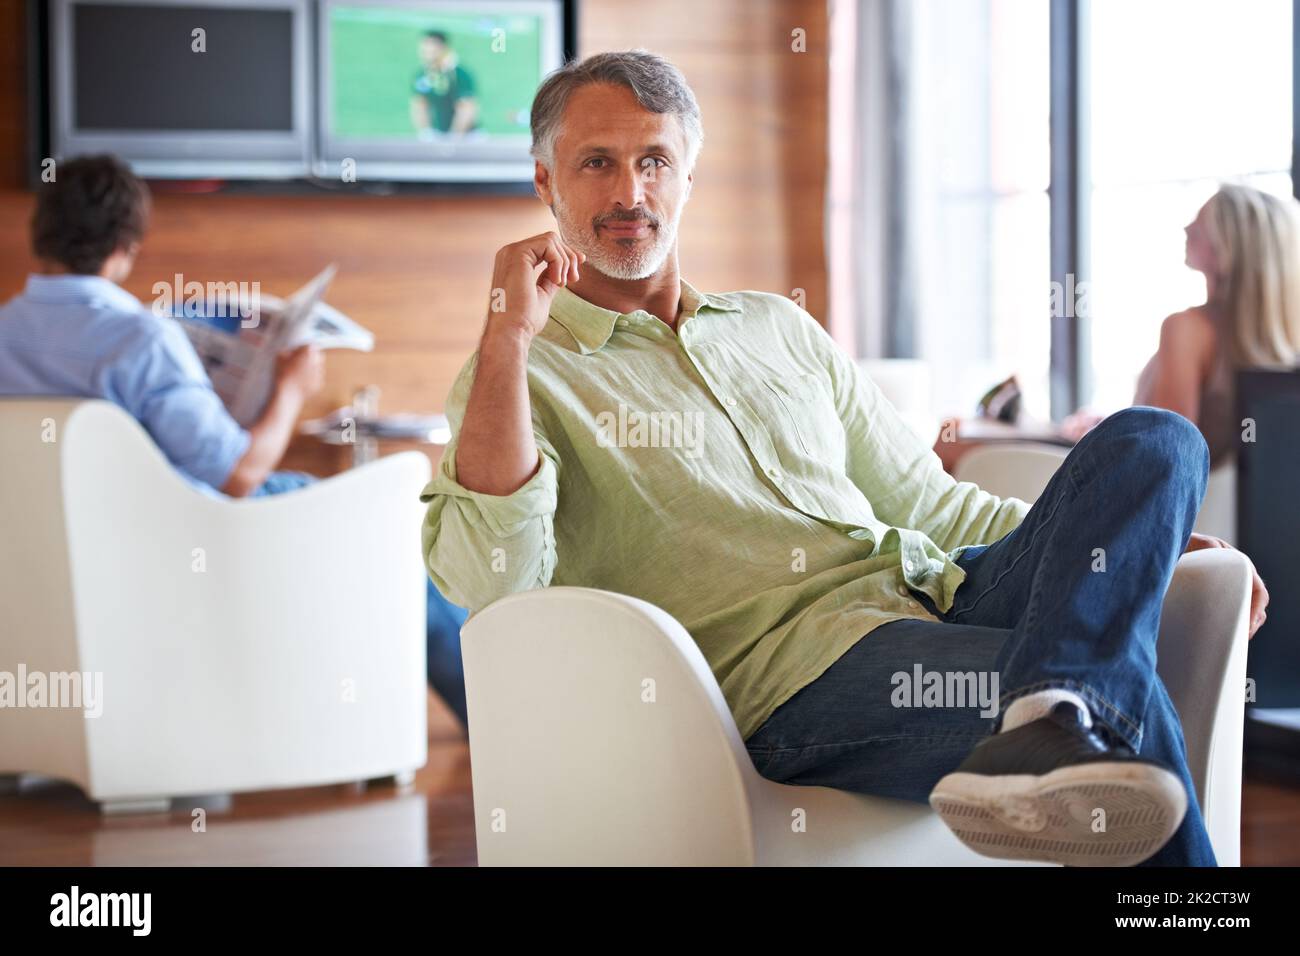 Every office needs a place to relax. Shot of a man sitting confidently on a chair indoors. Stock Photo